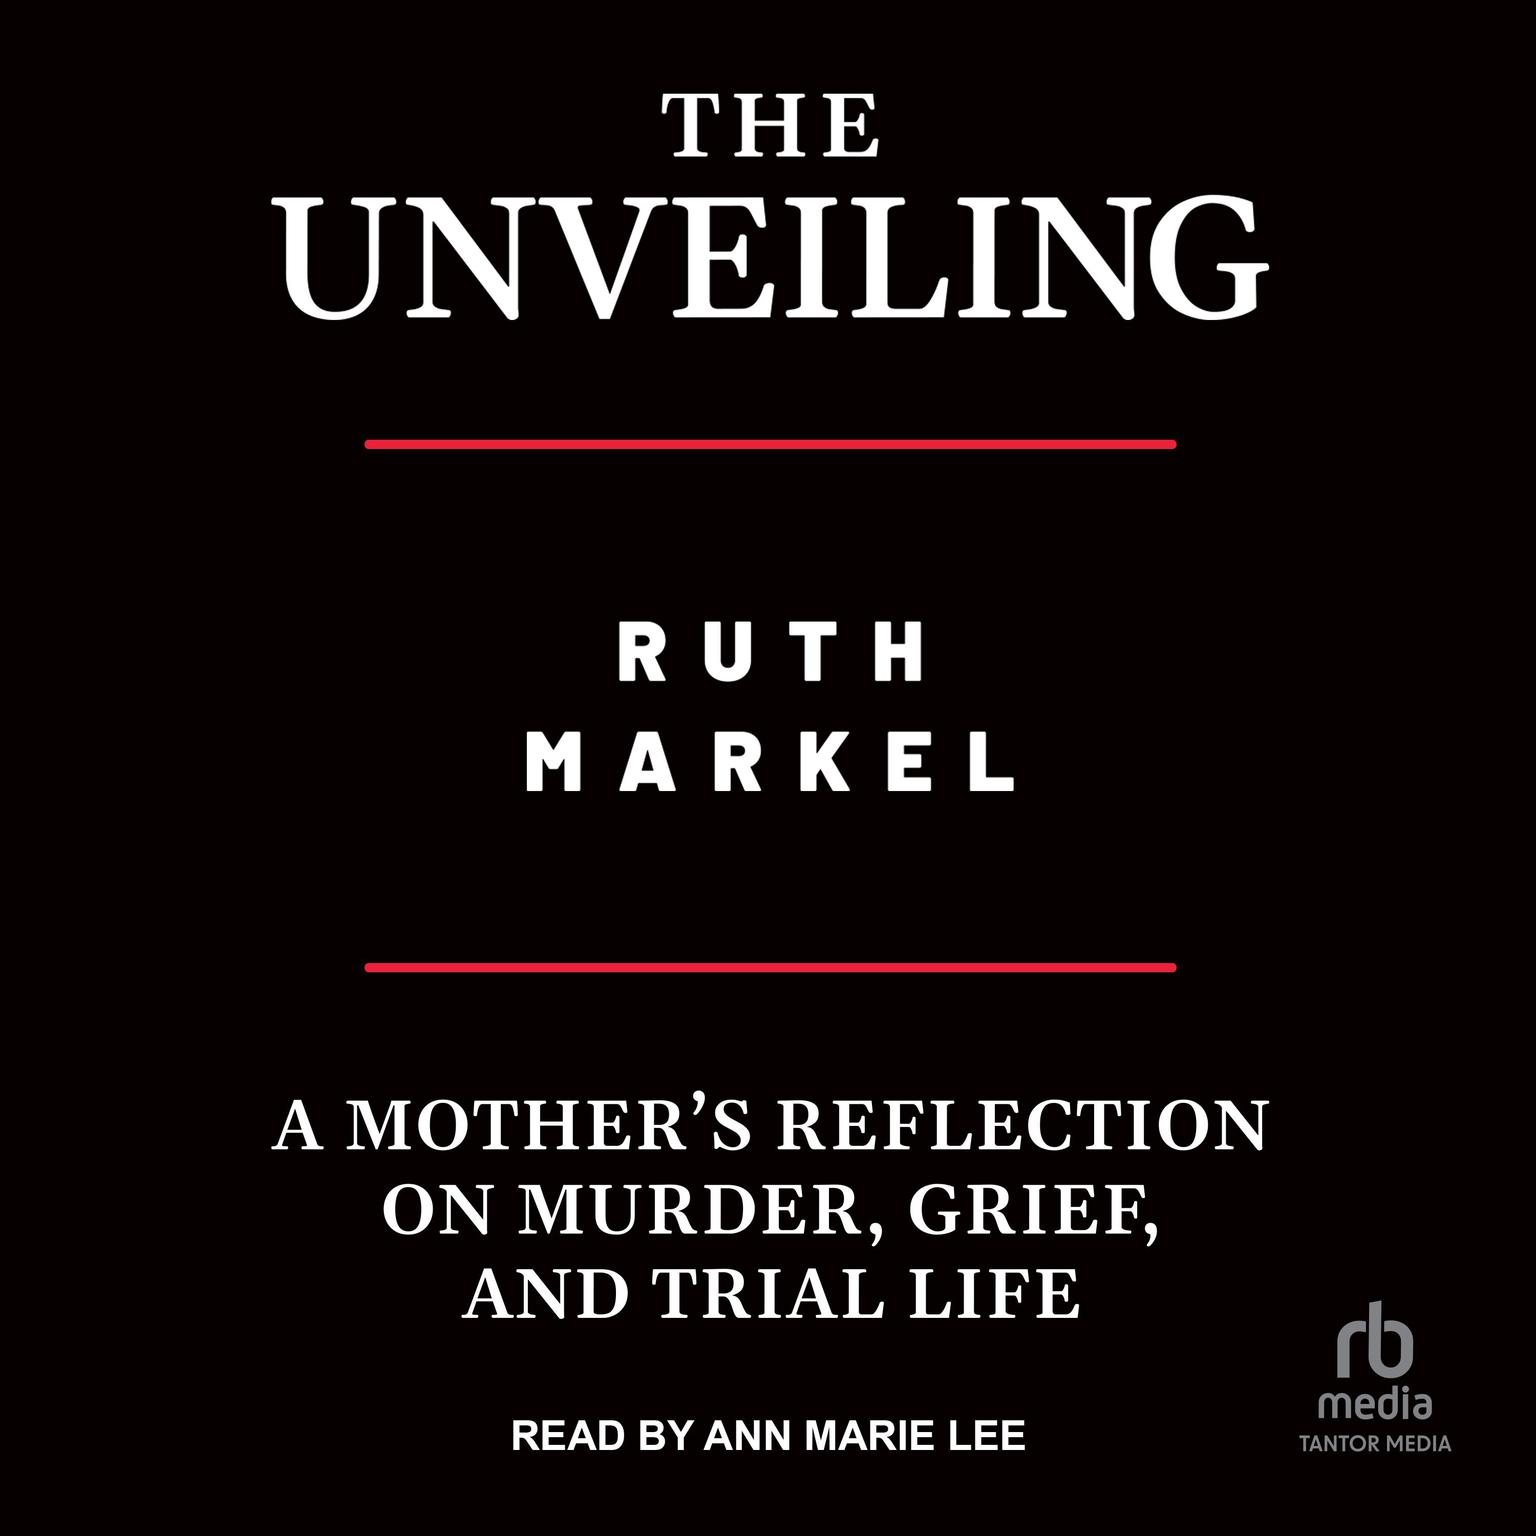 The Unveiling: A Mothers Reflection on Murder, Grief, and Trial Life Audiobook, by Ruth Markel